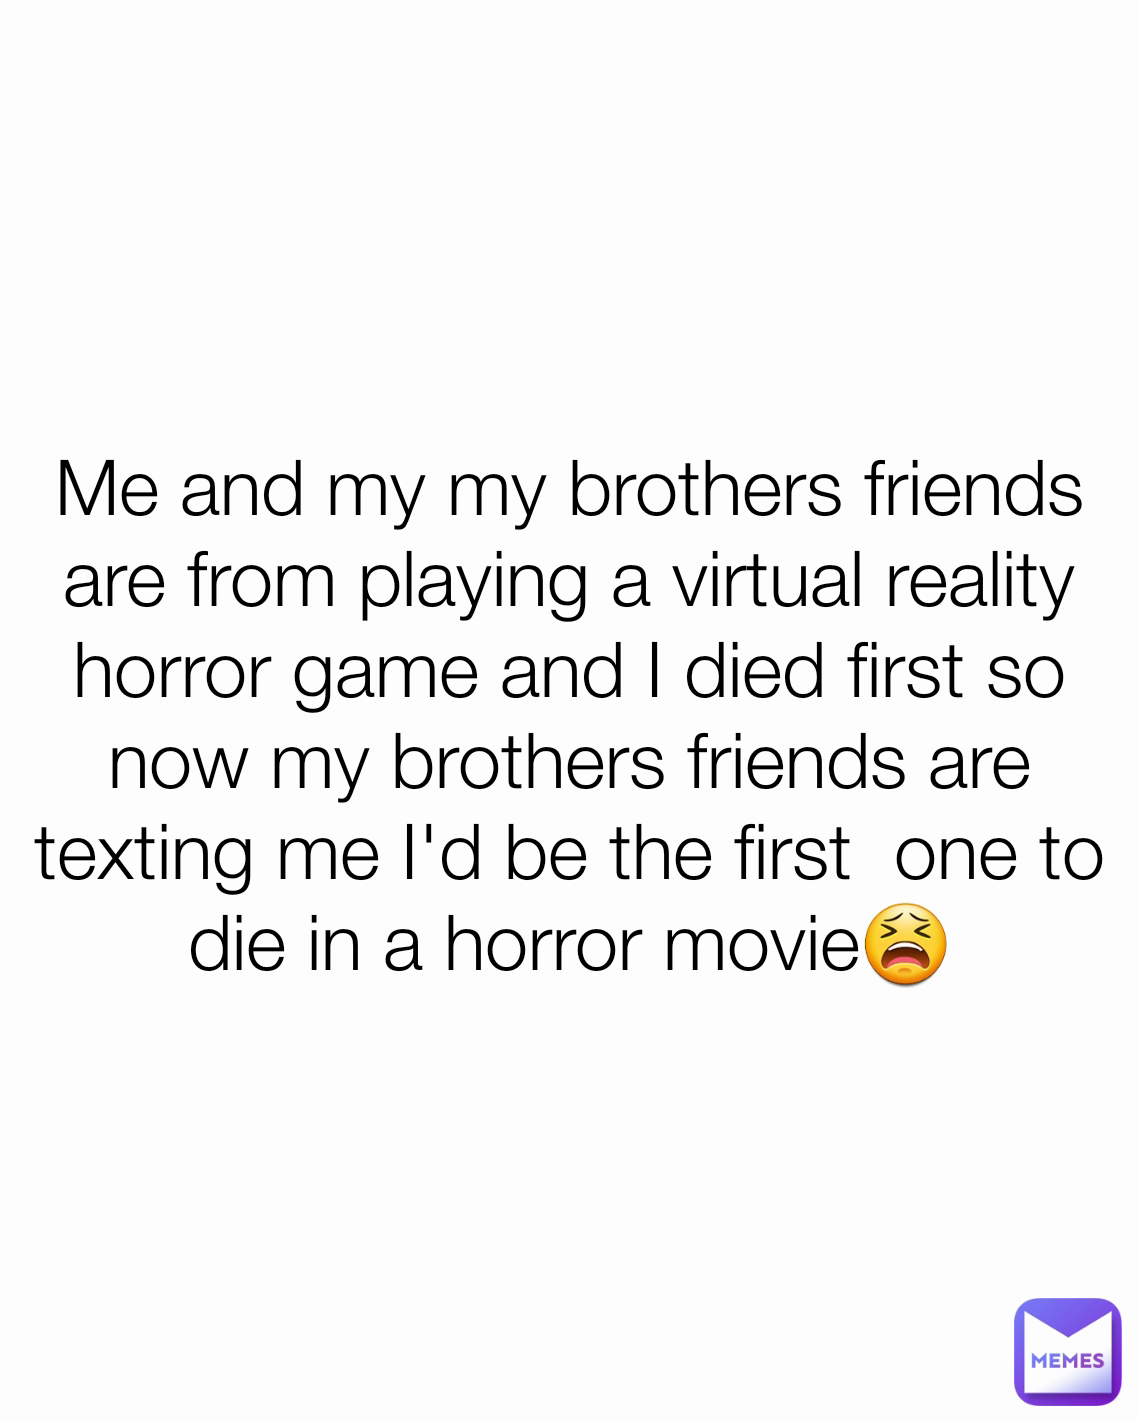 Me and my my brothers friends are from playing a virtual reality horror game and I died first so now my brothers friends are texting me I'd be the first  one to die in a horror movie😫